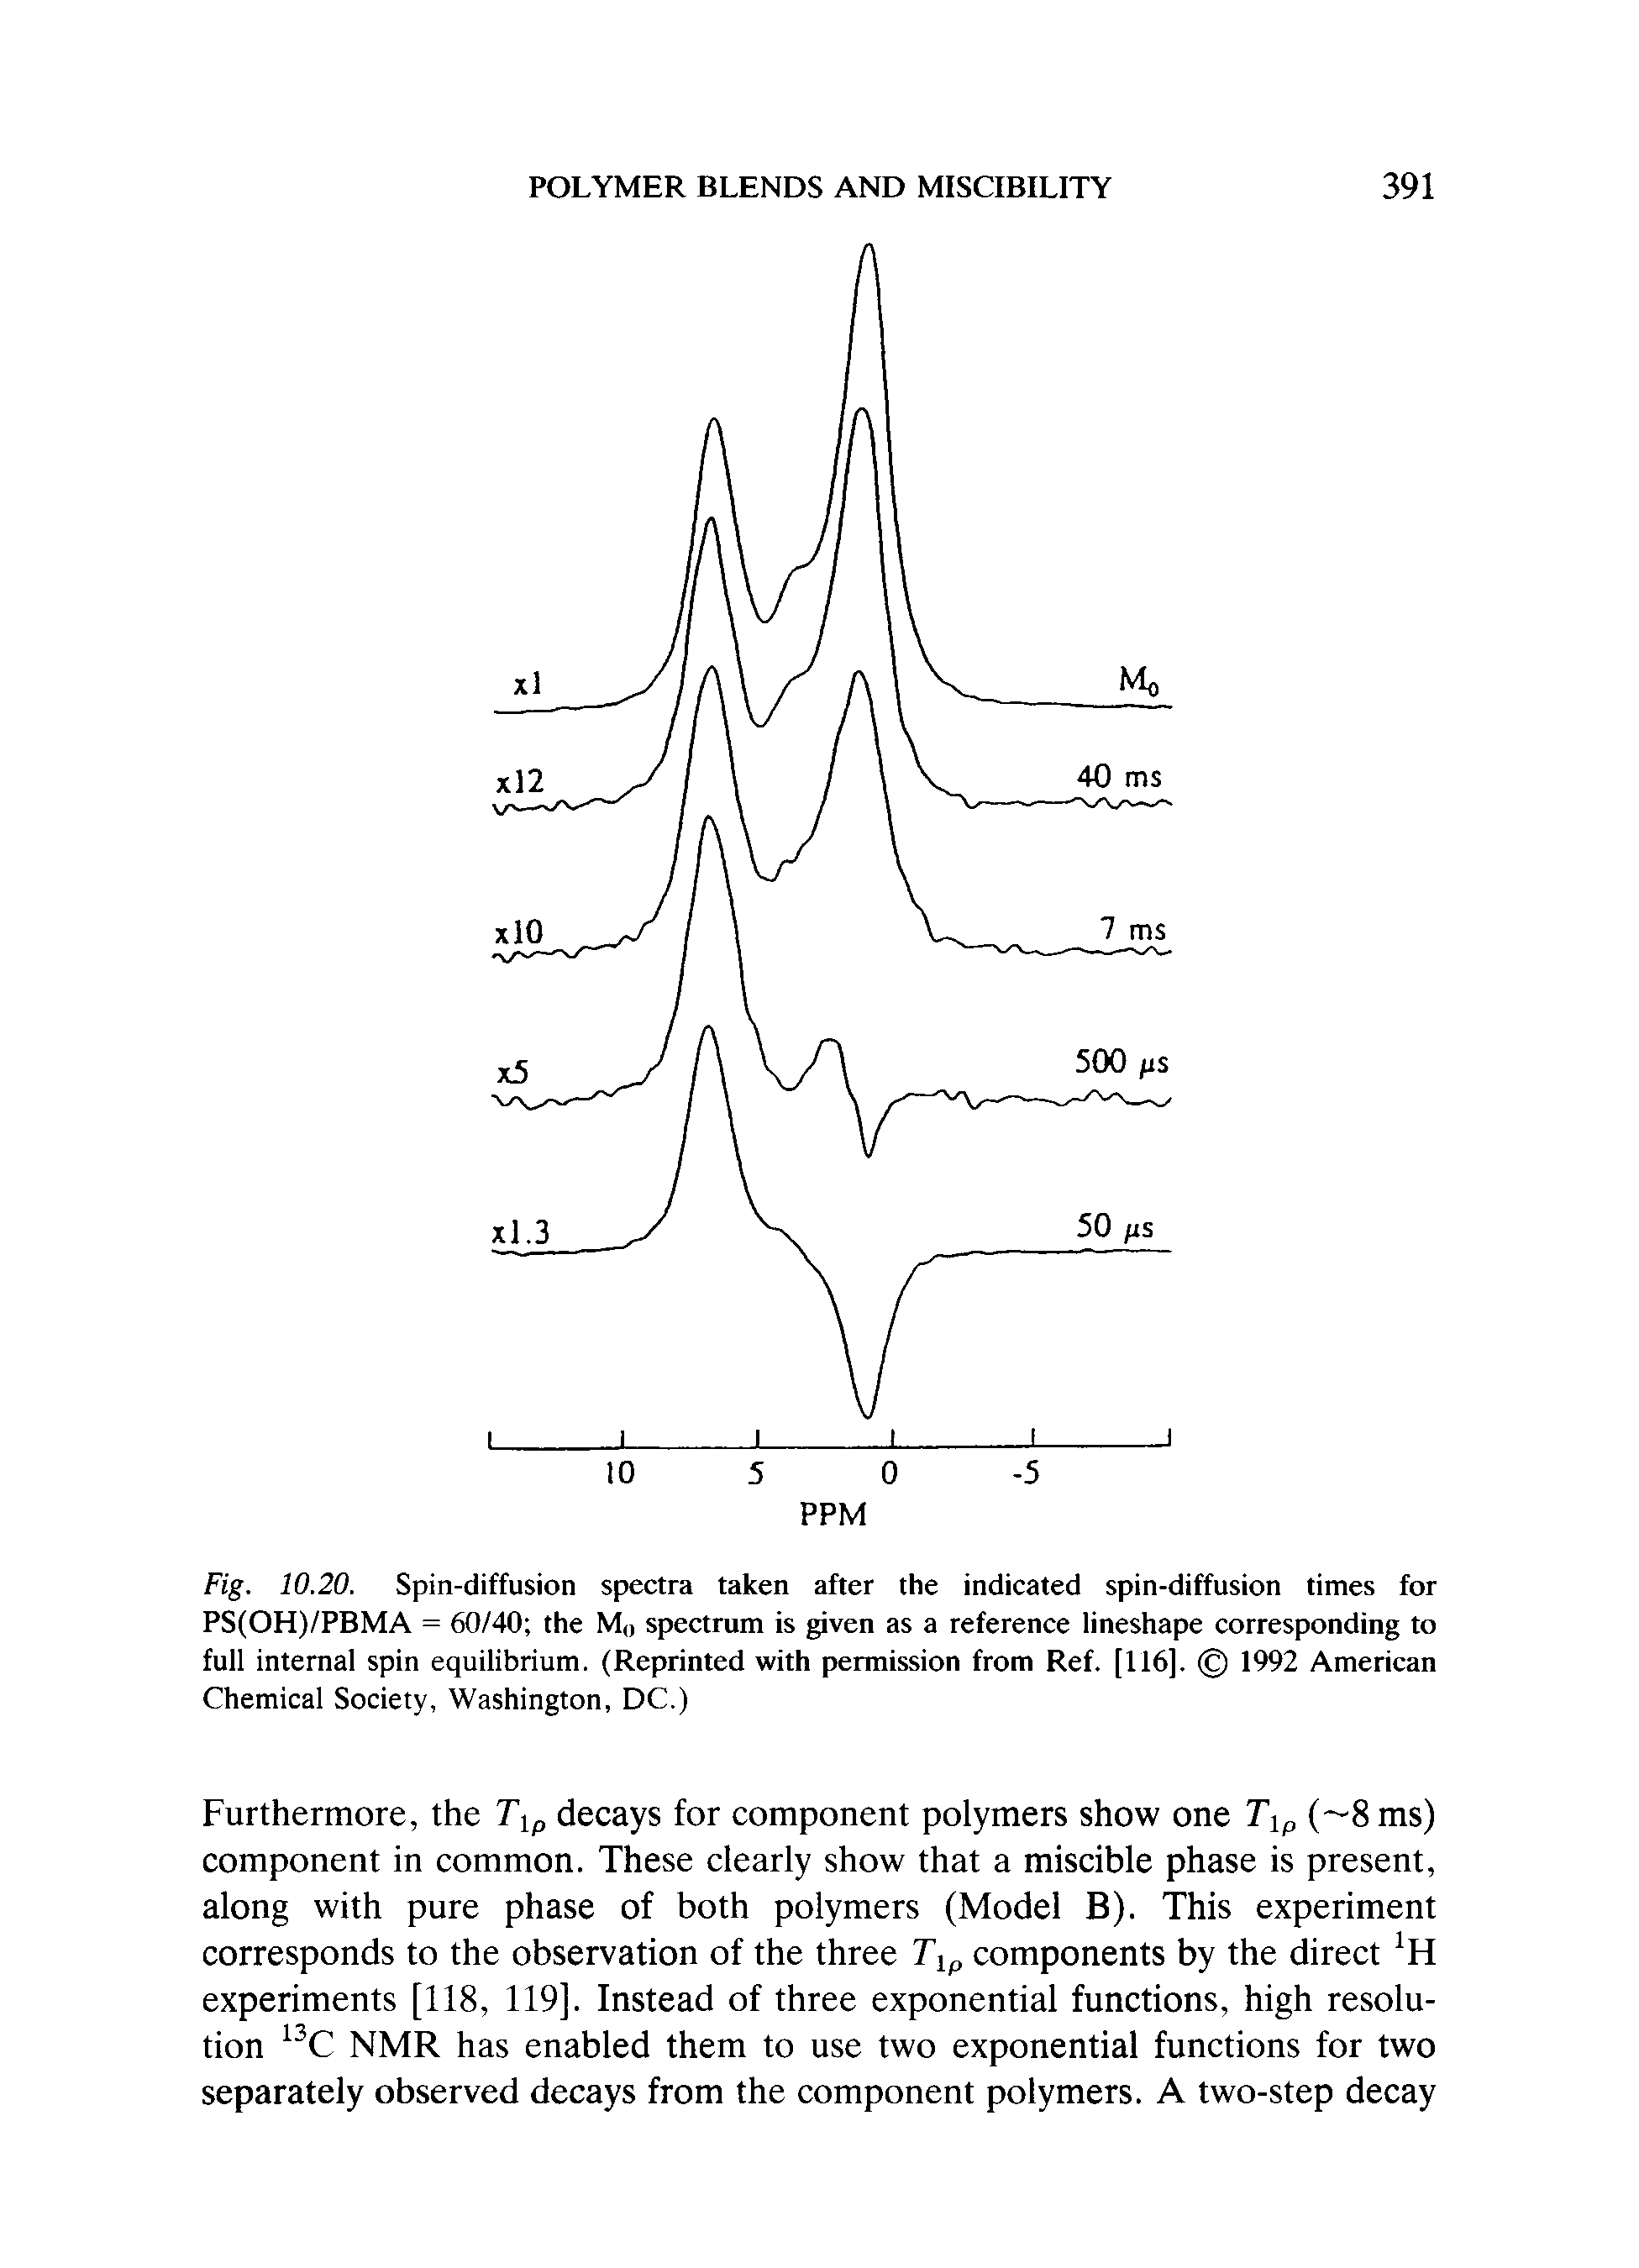 Fig. 10.20. Spin-diffusion spectra taken after the indicated spin-diffusion times for PS(OH)/PBMA = 60/40 the Mo spectrum is given as a reference lineshape corresponding to full internal spin equilibrium. (Reprinted with permission from Ref. [116]. 1992 American Chemical Society, Washington, DC.)...